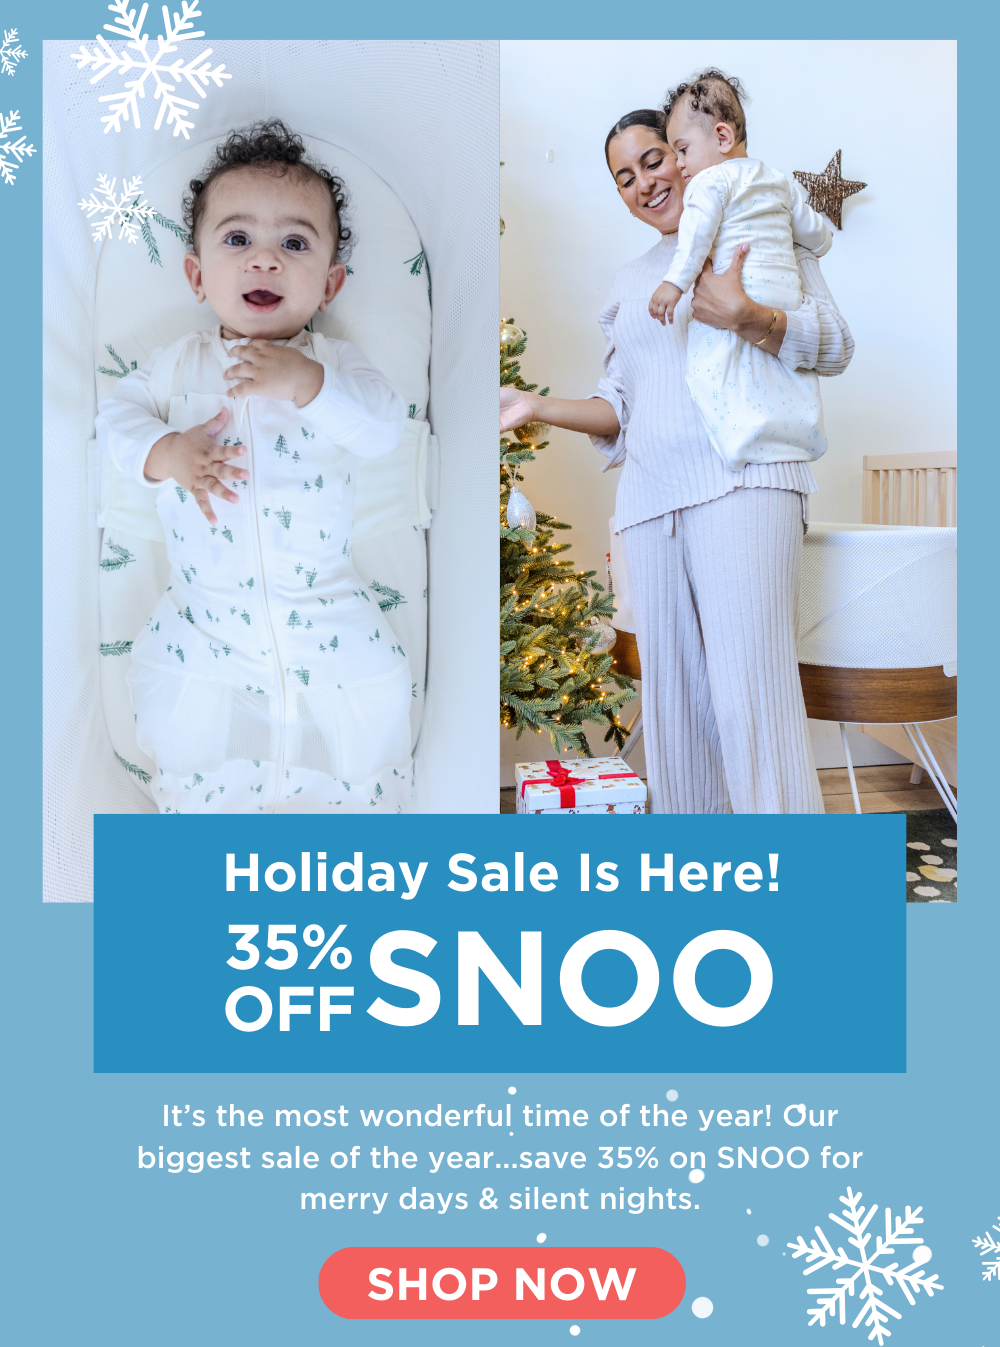 Holiday Sale Is Here! 35% OFF SNOO! It’s the most wonderful time of the year! Our biggest sale of the year...save 35% on SNOO for merry days & silent nights. SHOP NOW